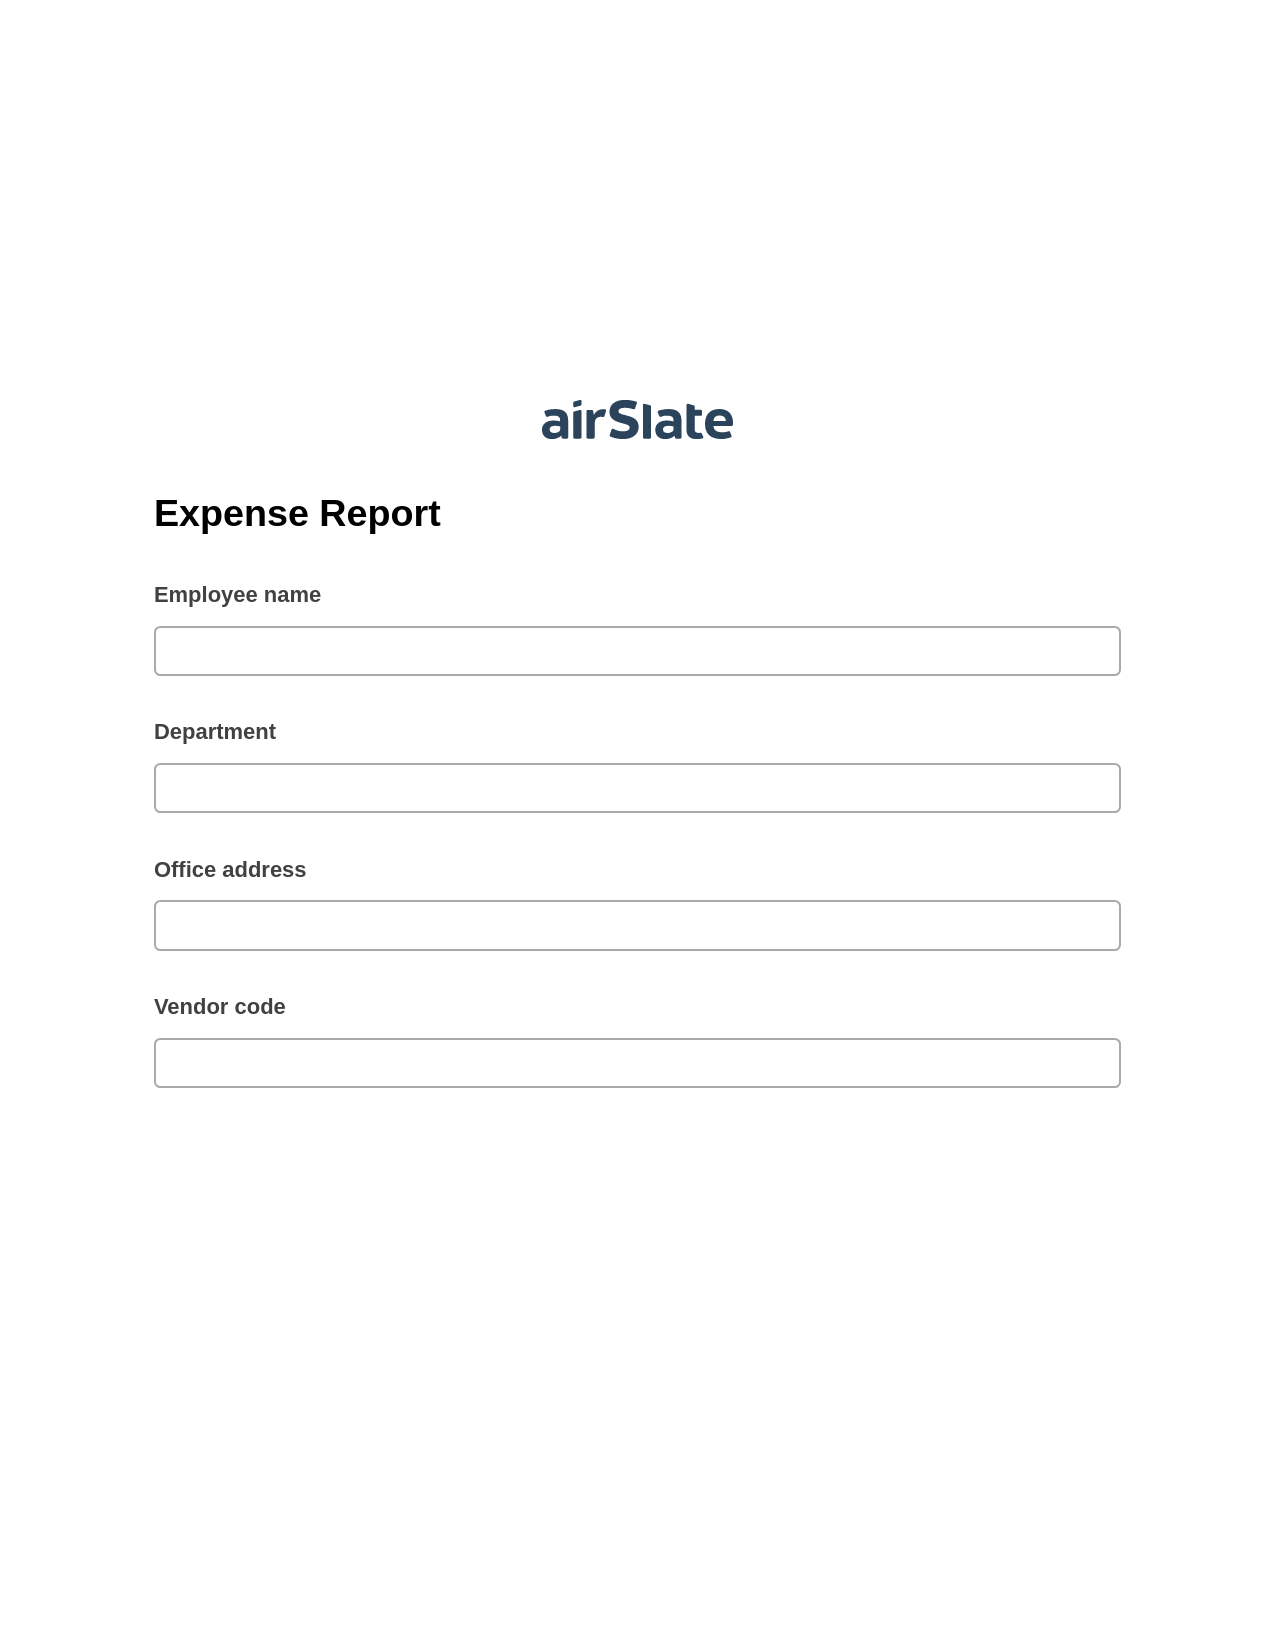 Multirole Expense Report Pre-fill from CSV File Bot, Send Mailchimp Campaign Bot, Export to Excel 365 Bot